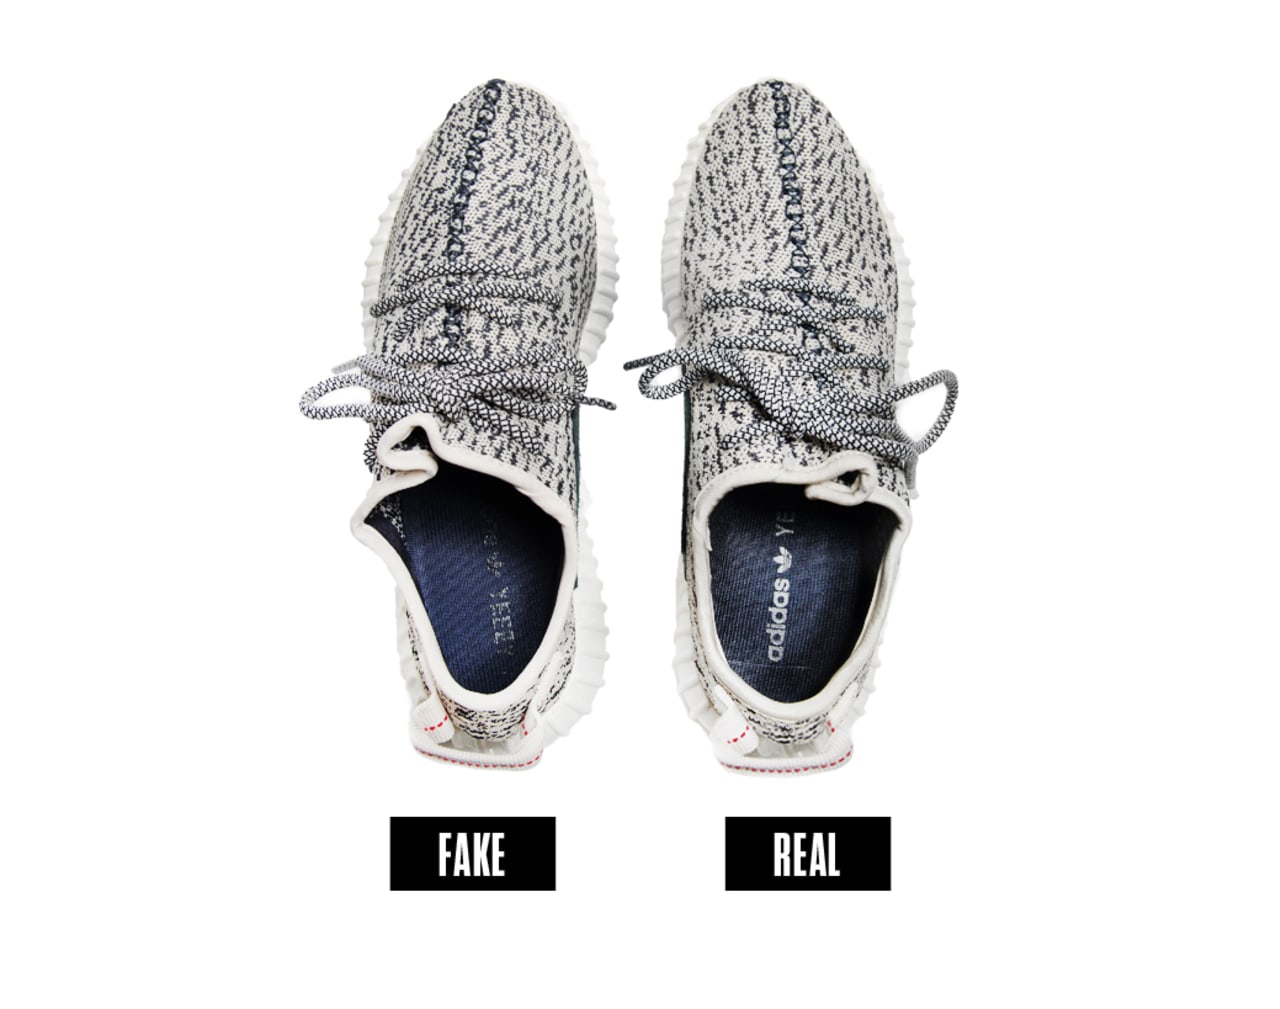 Fake Shoe Collectors Share Their 